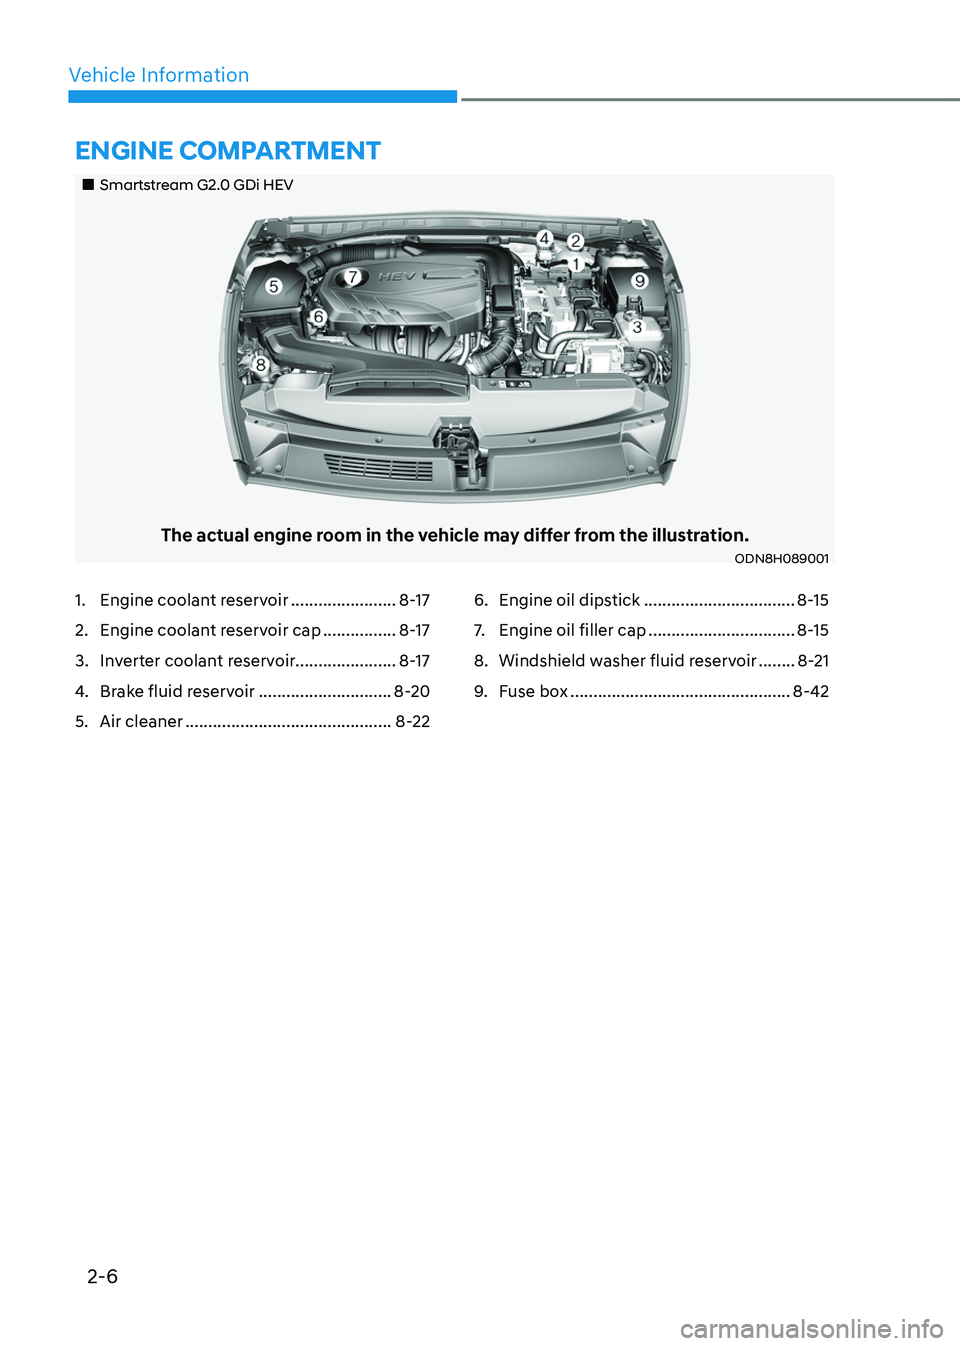 HYUNDAI SONATA HYBRID 2021  Owners Manual 2-6
Vehicle Information
„„Smartstream G2.0 GDi HEV
The actual engine room in the vehicle may differ from the illustration.ODN8H089001
ENGINE COMPARTMENT
1. Engine coolant reservoir .........